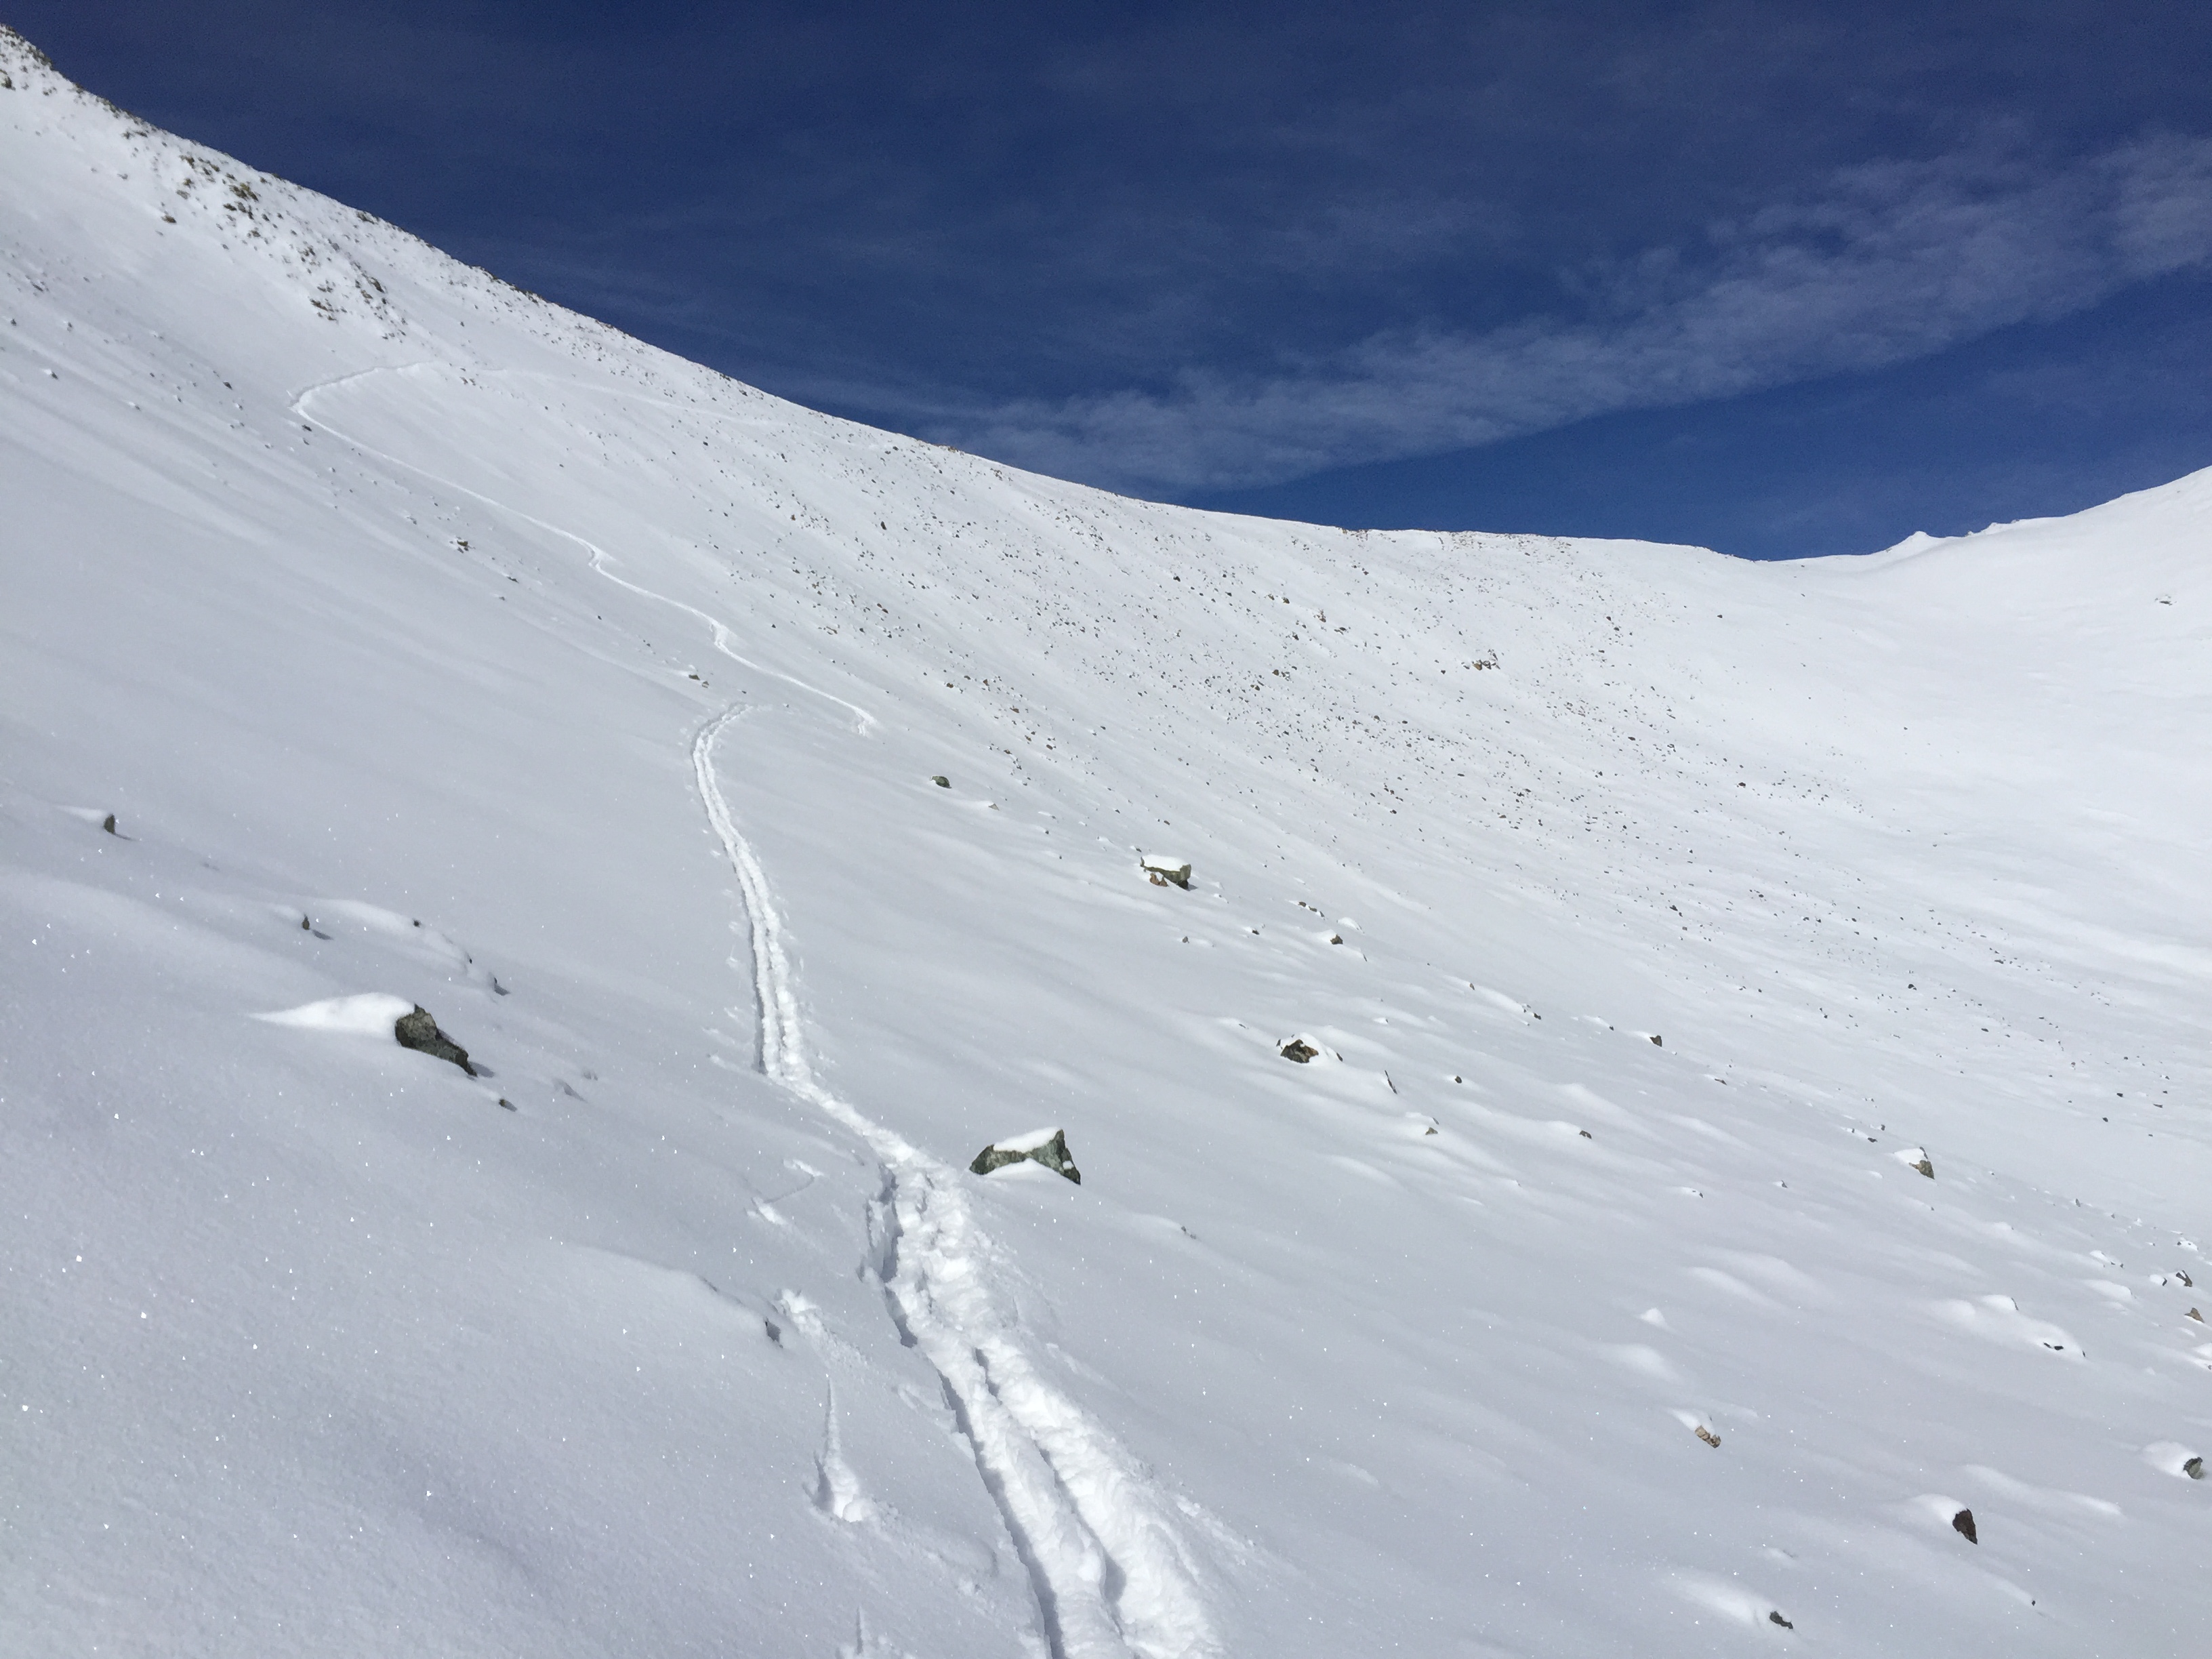 Looking back at my tracks as I traversed around to the northeast side of the peak.